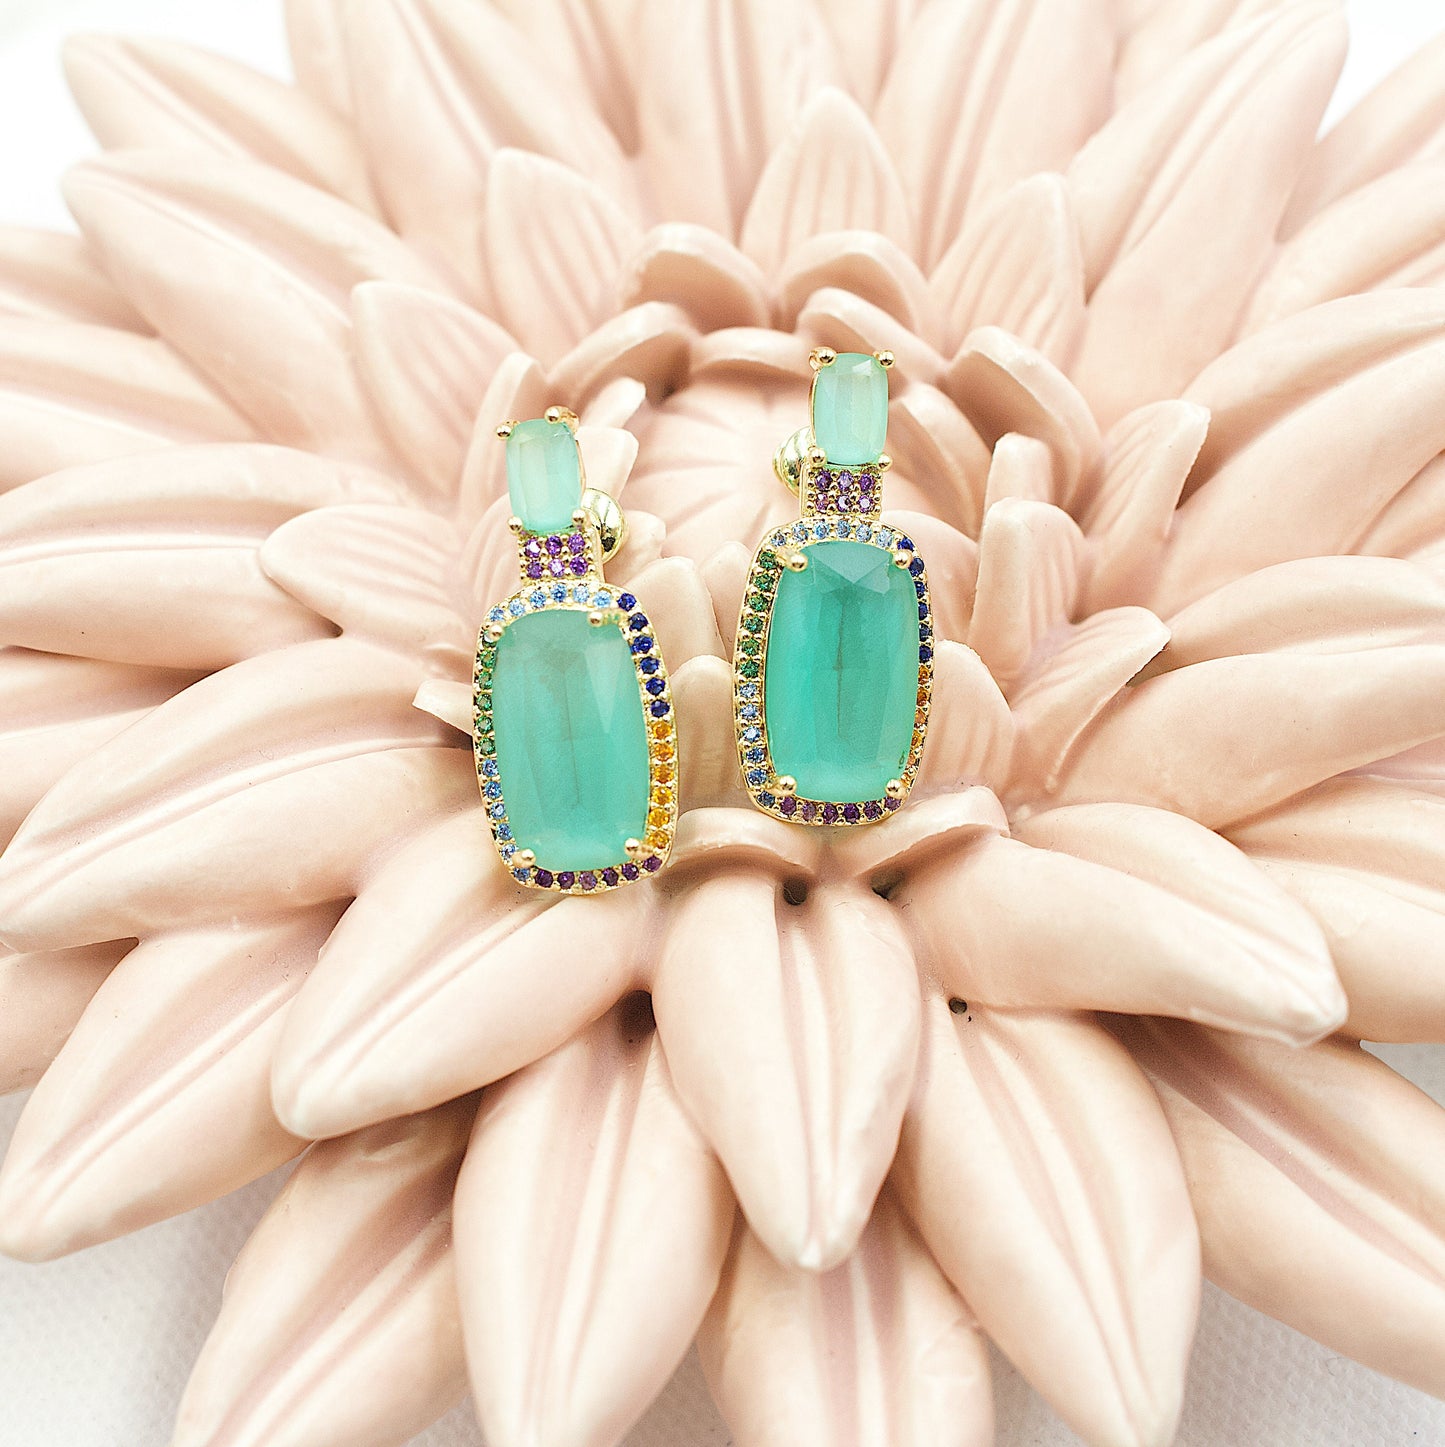 Turquoise Stone With Colored Rhinestones Around Stud Earrings